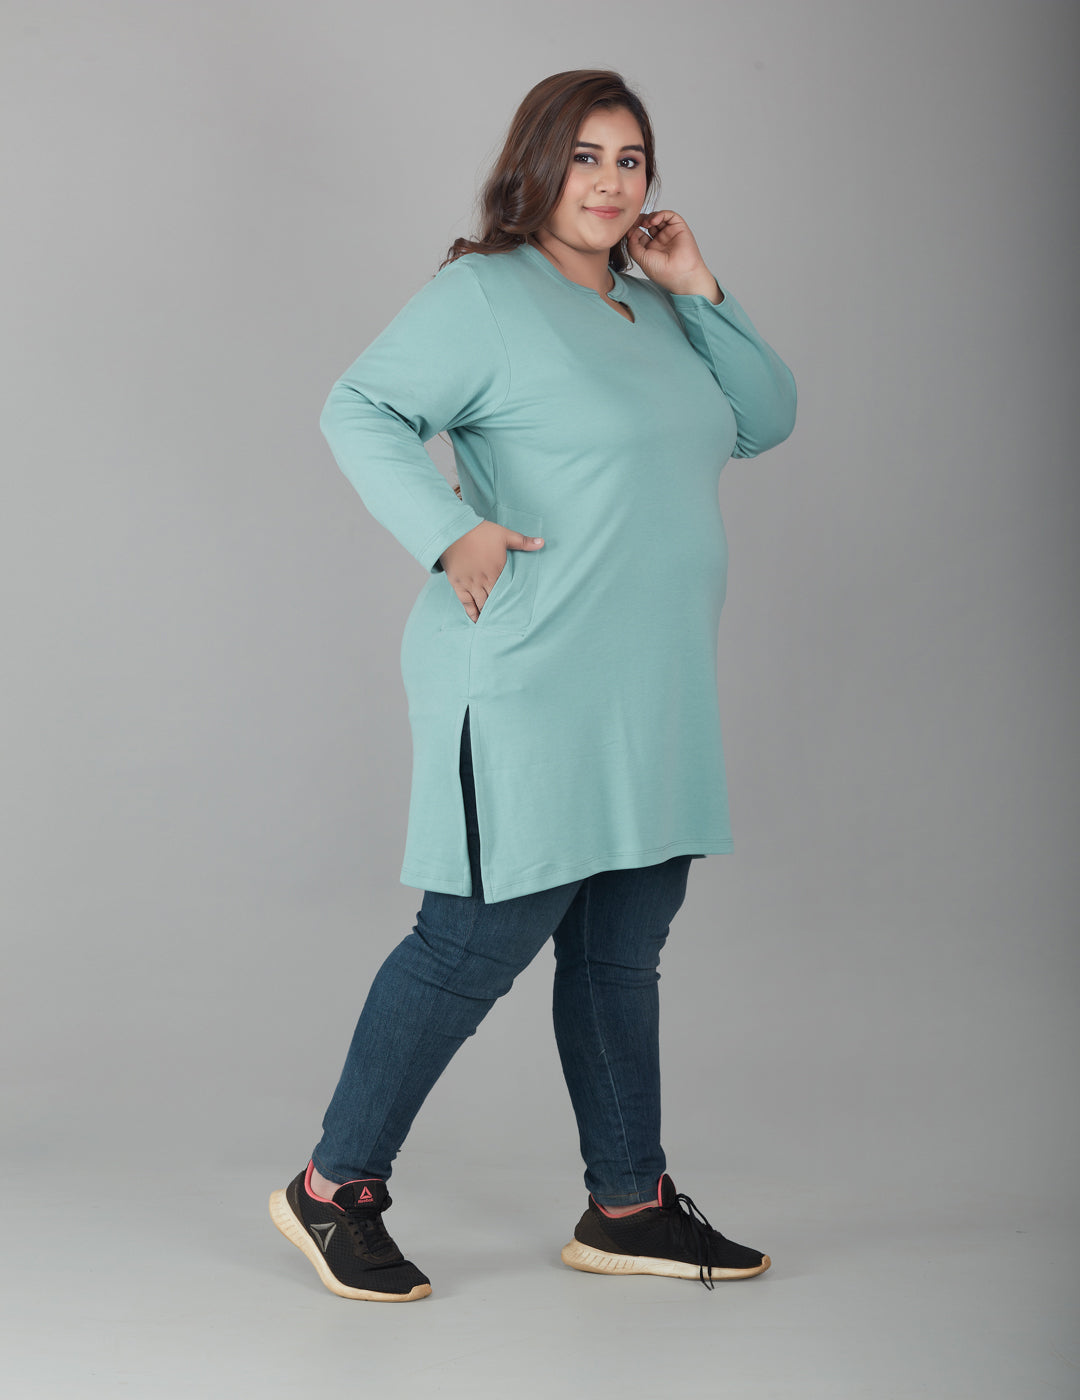 Plus Size Full Sleeves Long Tops For Women - Pack of 2 (Red & Sage) At Best Price